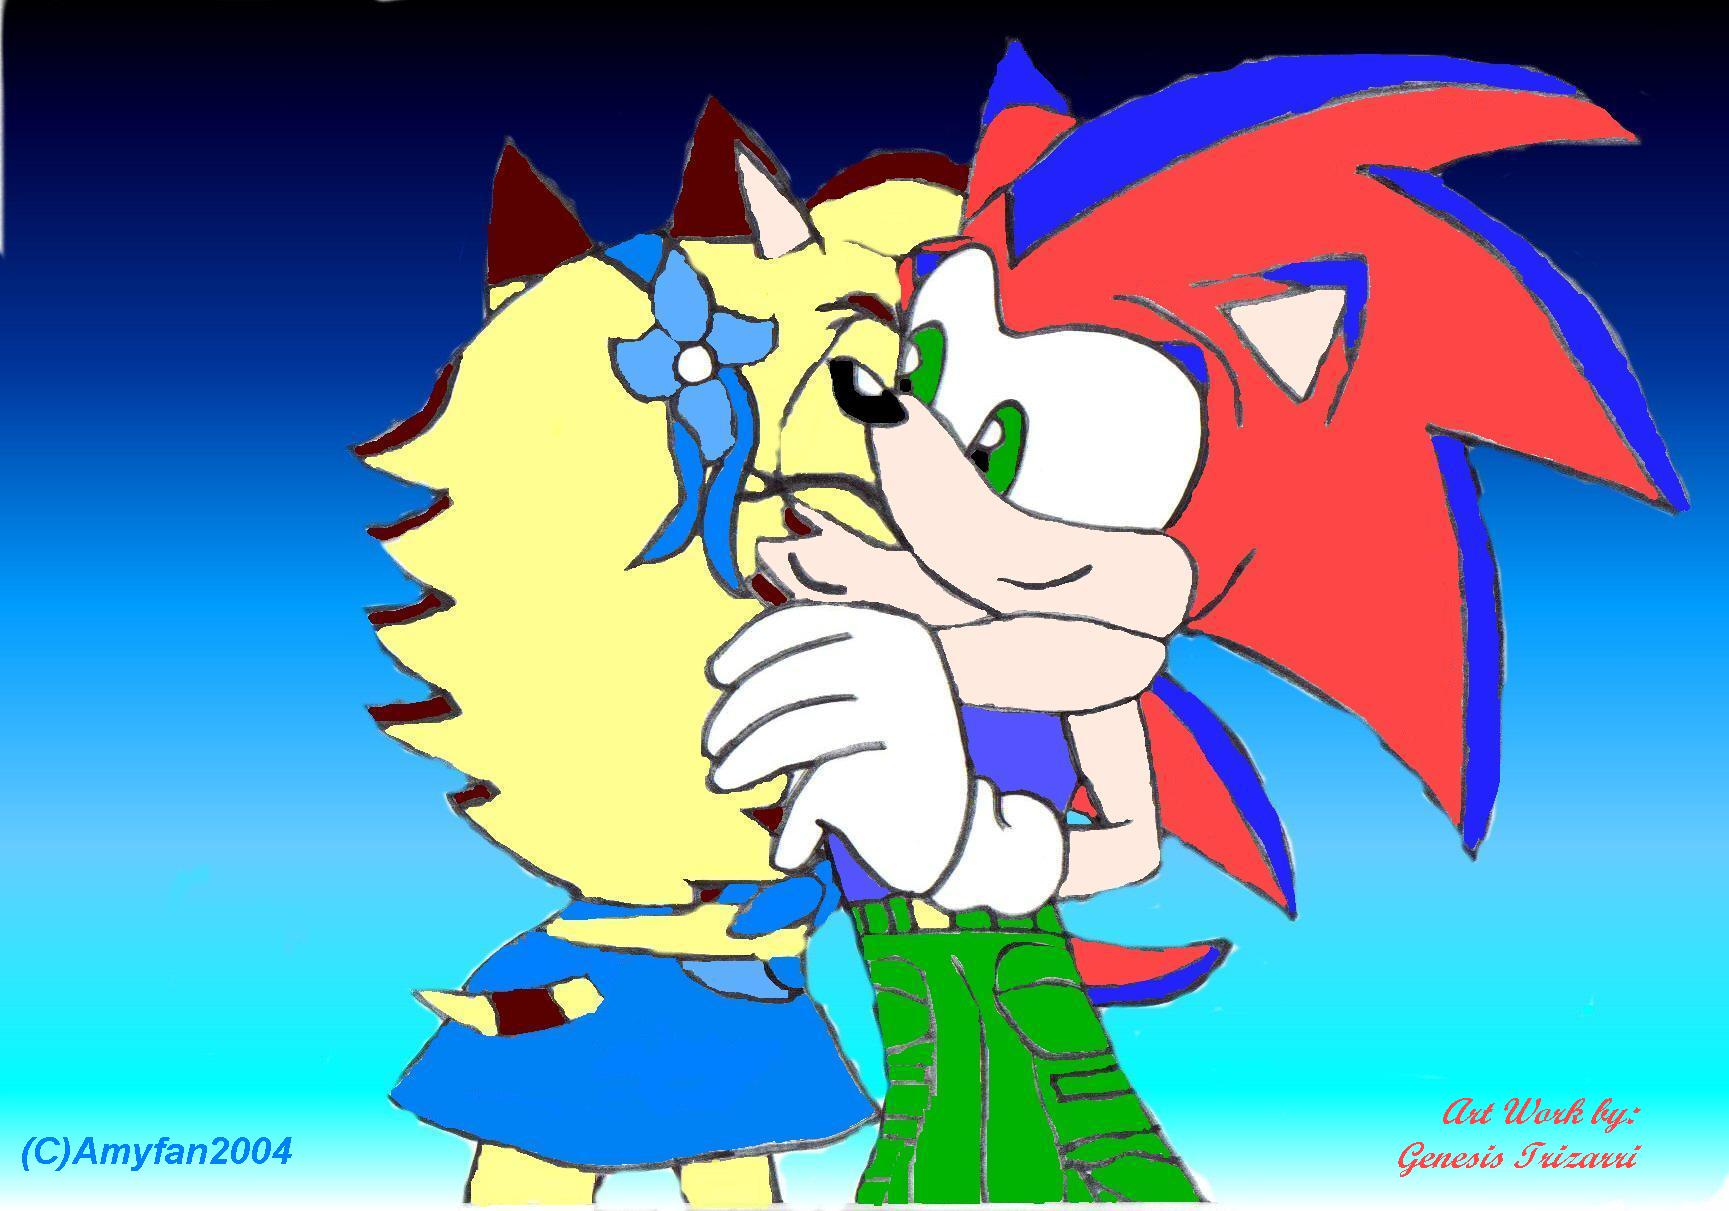 Genesis and Kevin - Request from SonicShadow2 by Amyfan2004